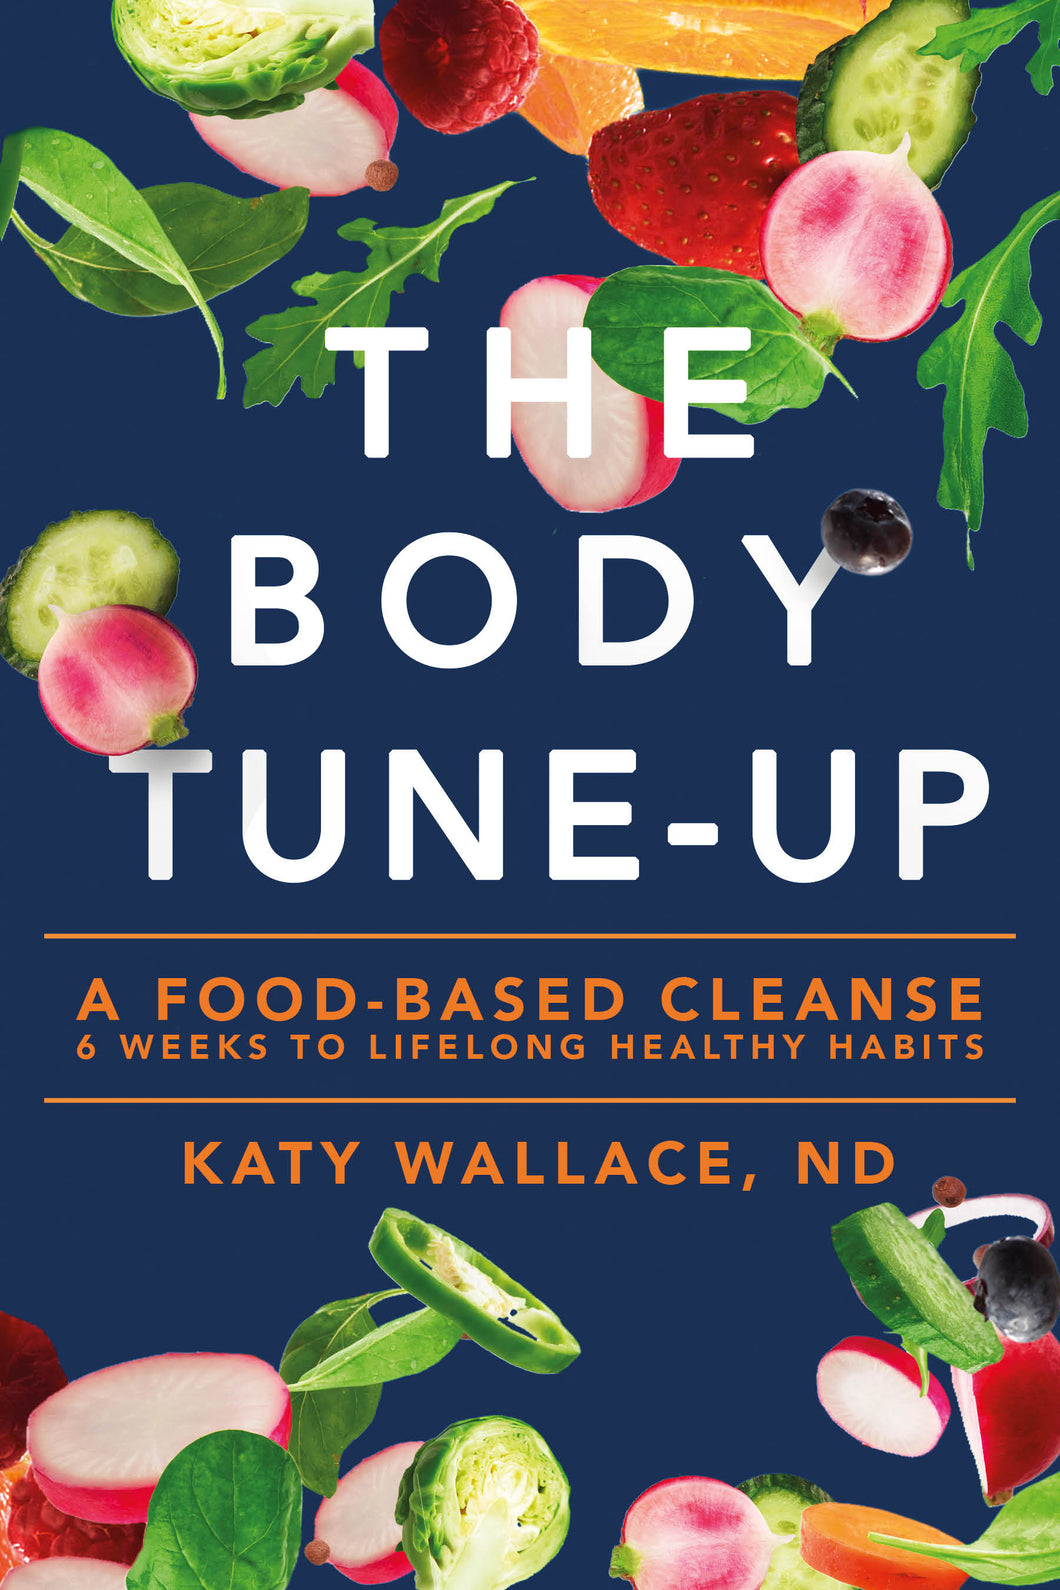 Body Tune-up Kit without Book: Comprehensive Supplement Kit for a Food-based Cleanse